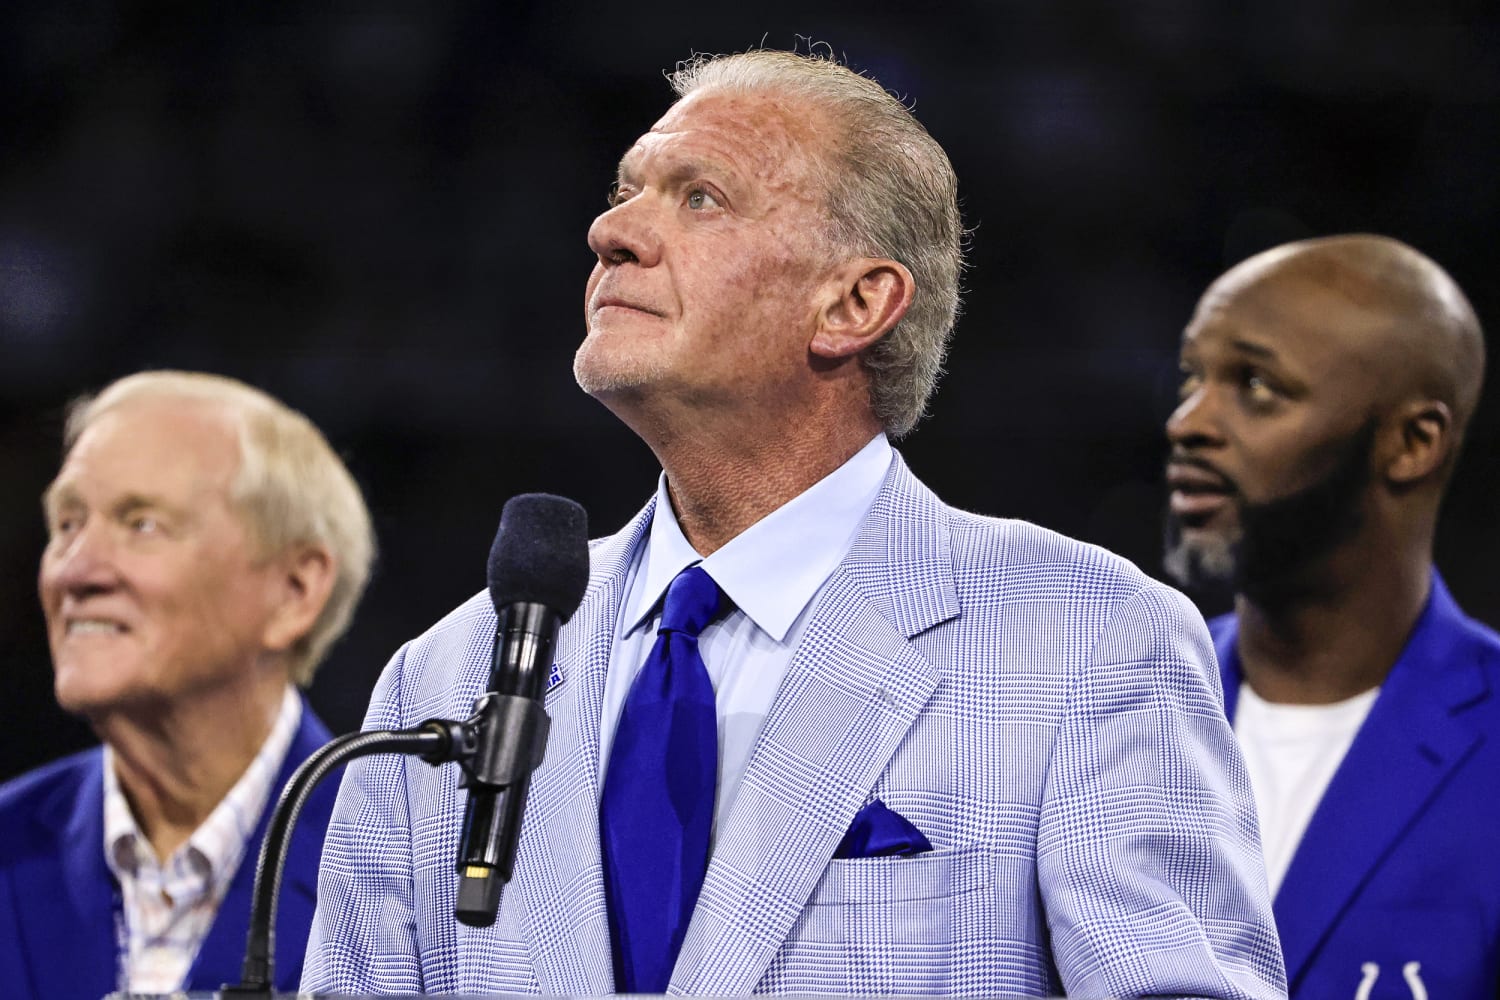 Jim Irsay Provides Health Update, Says He’s ‘On The Mend’